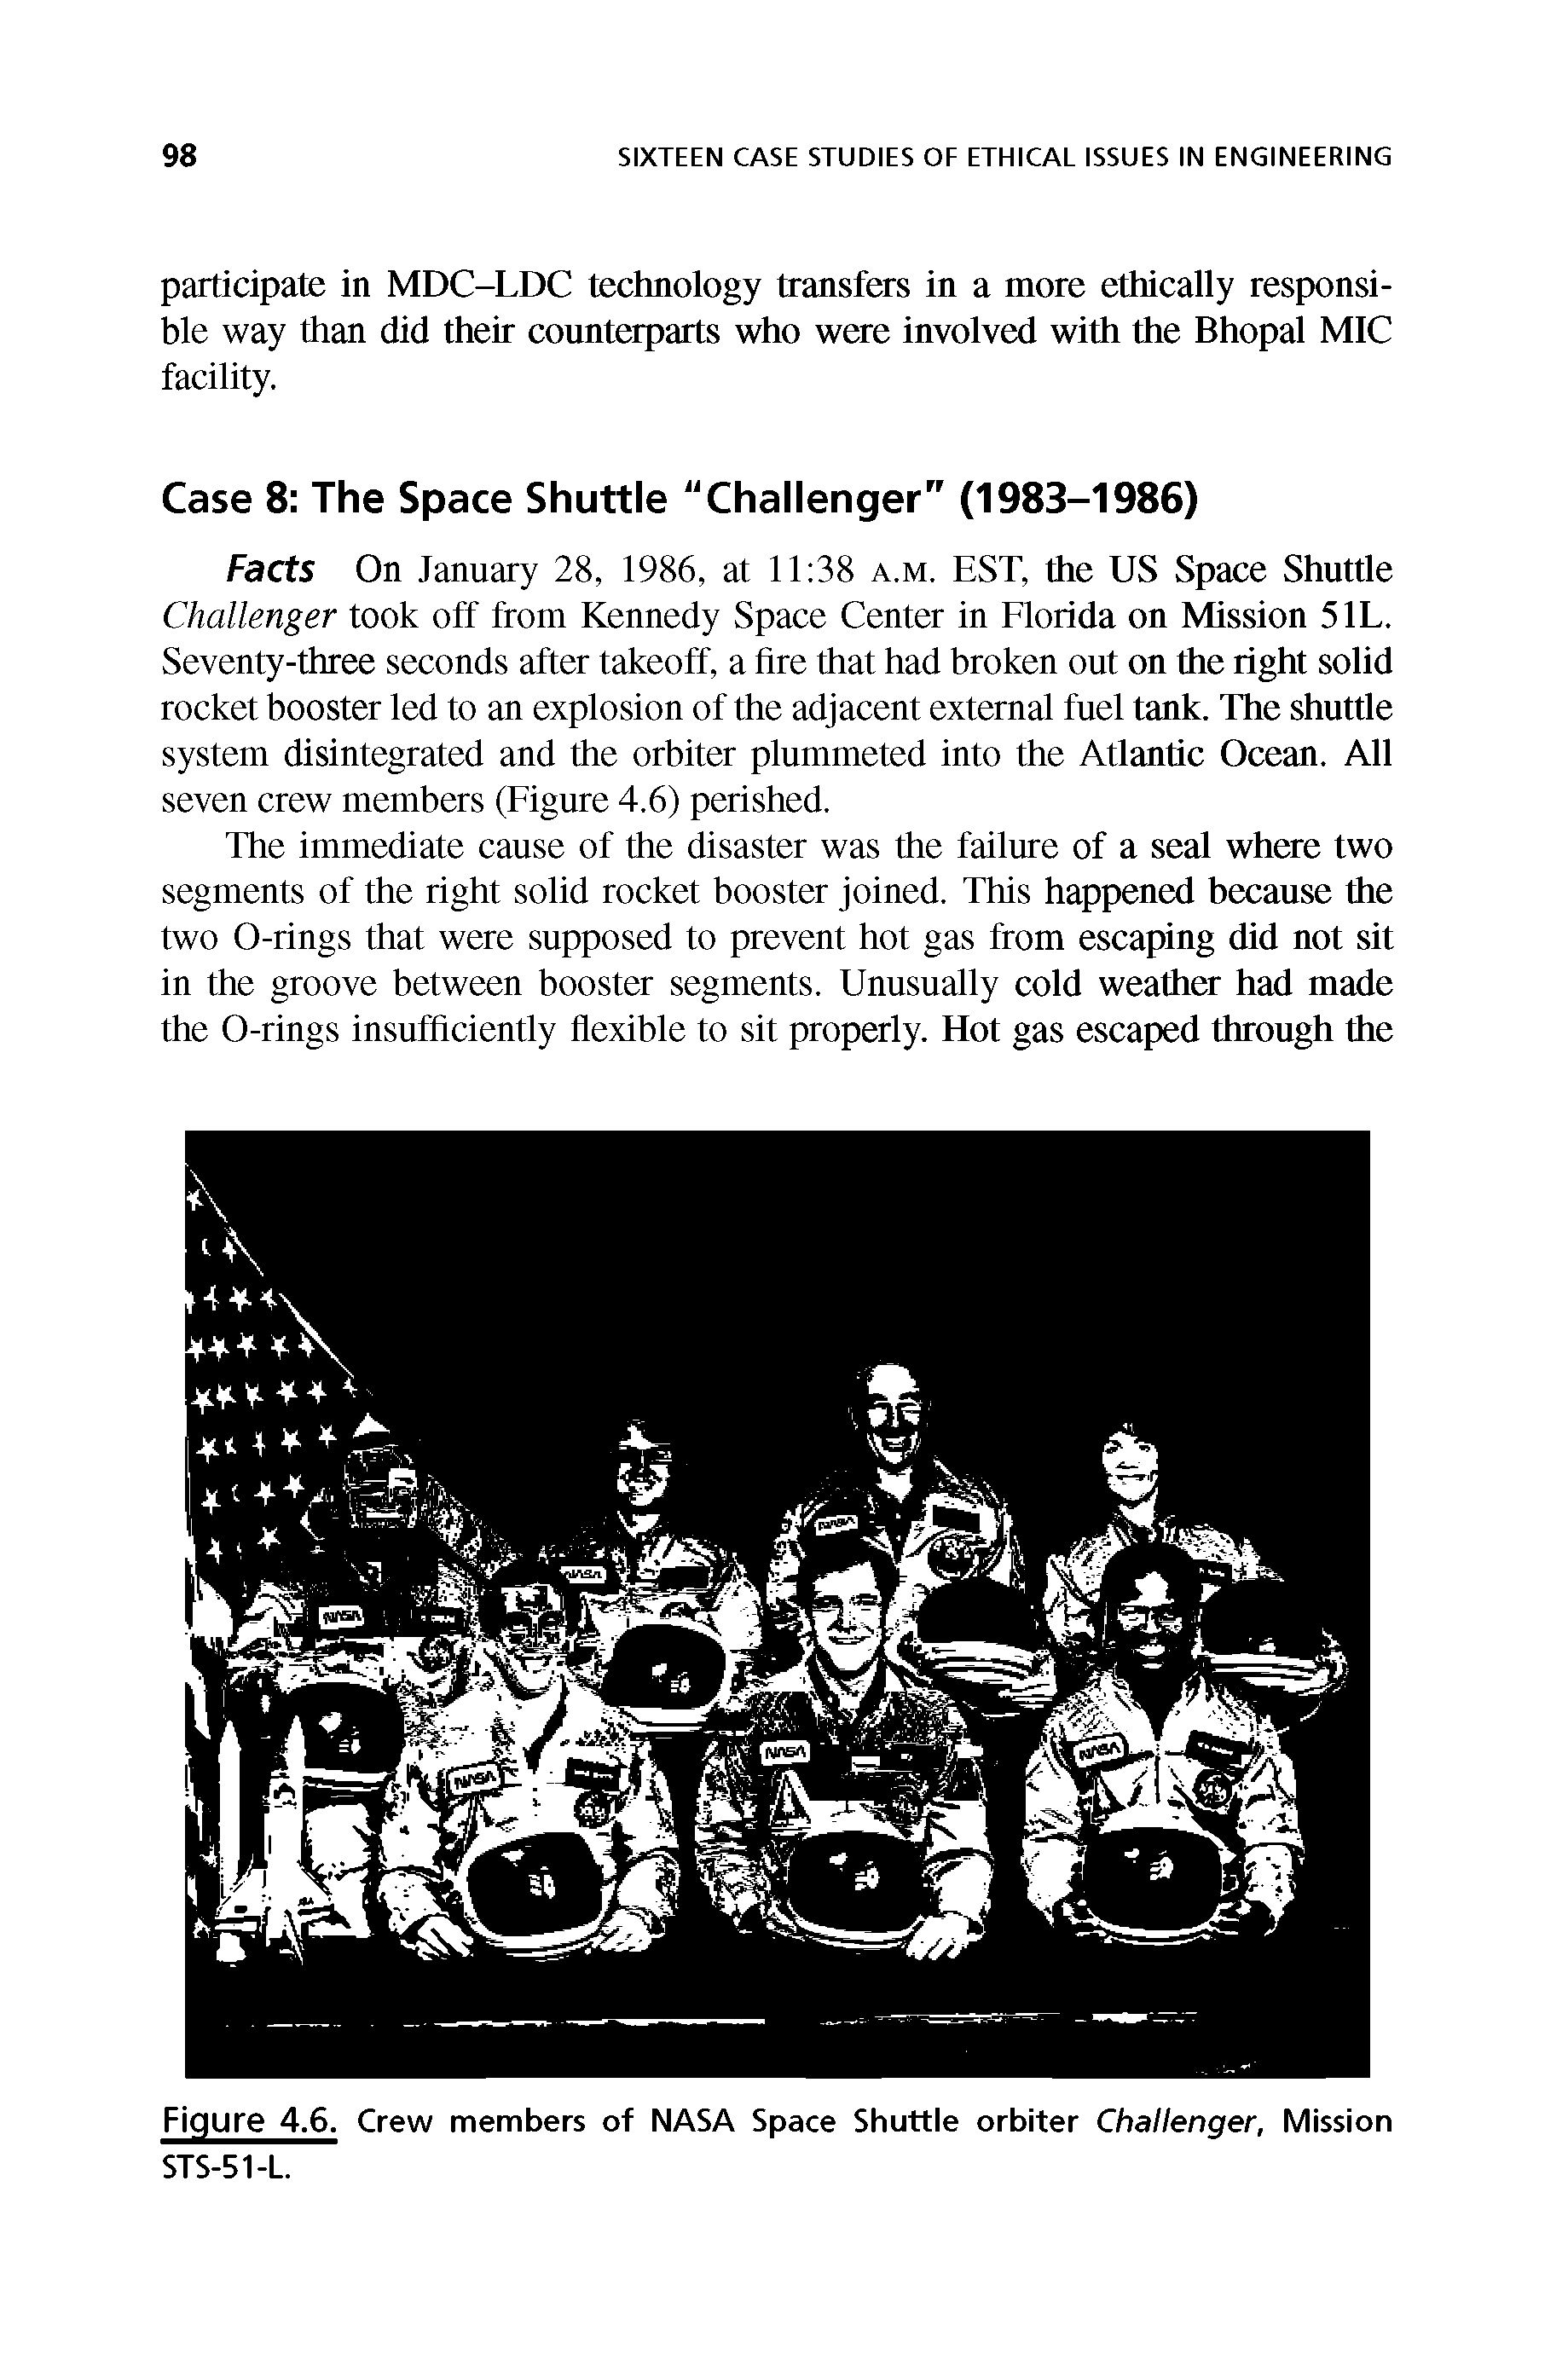 Figure 4.6. Crew members of NASA Space Shuttle orbiter Challenger, Mission STS-51-L.